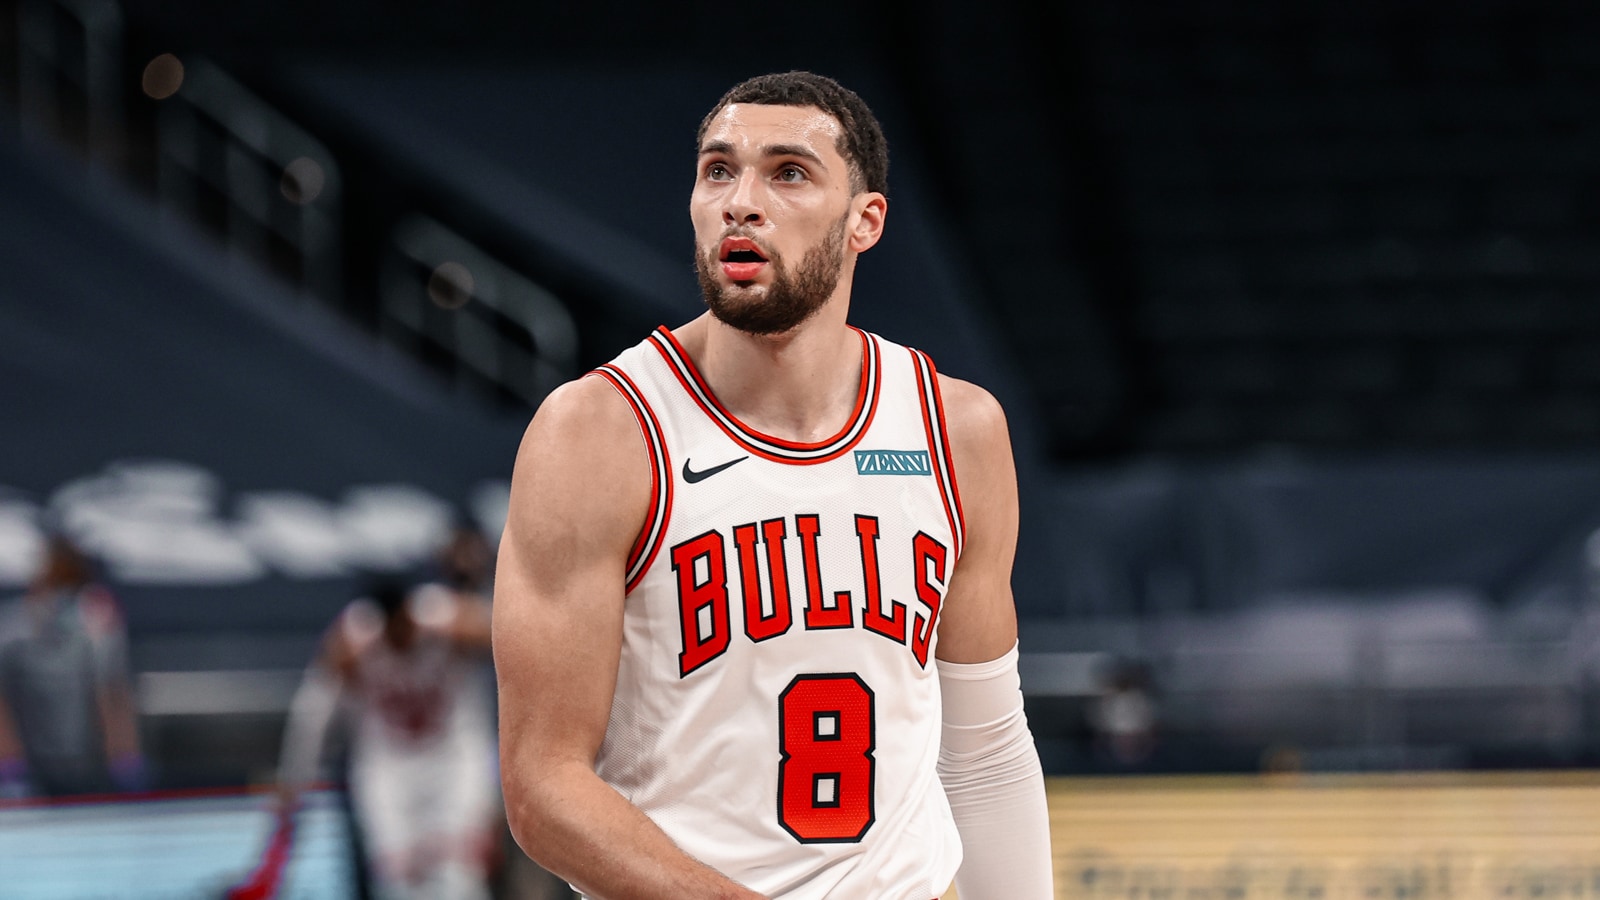 Bulls All-Star shooting guard Zach LaVine out for the year with foot surgery